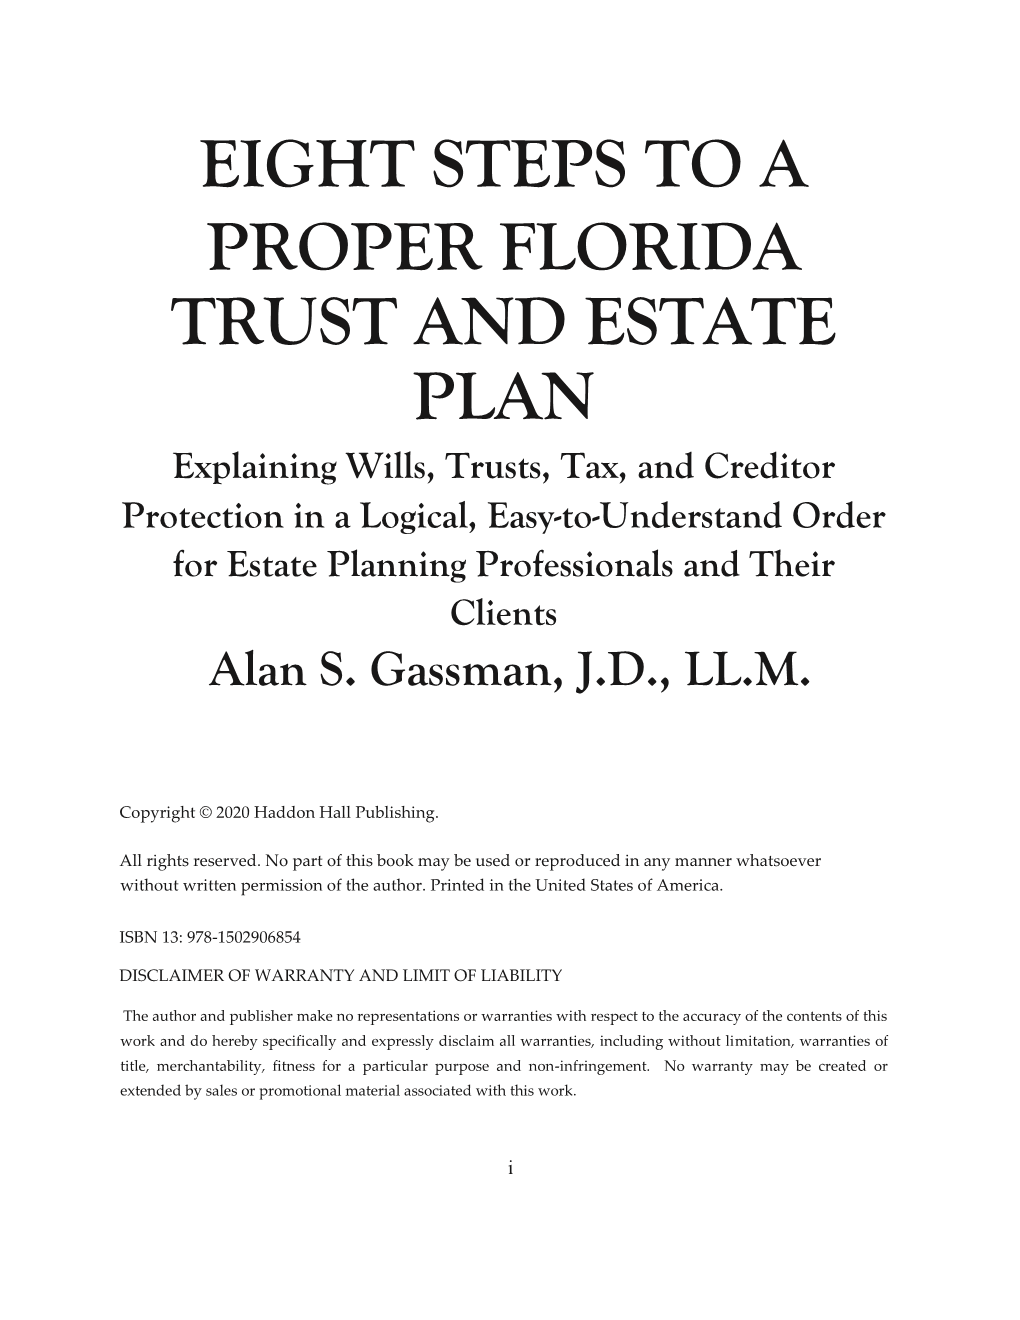 Eight Steps to a Proper Florida Trust and Estate